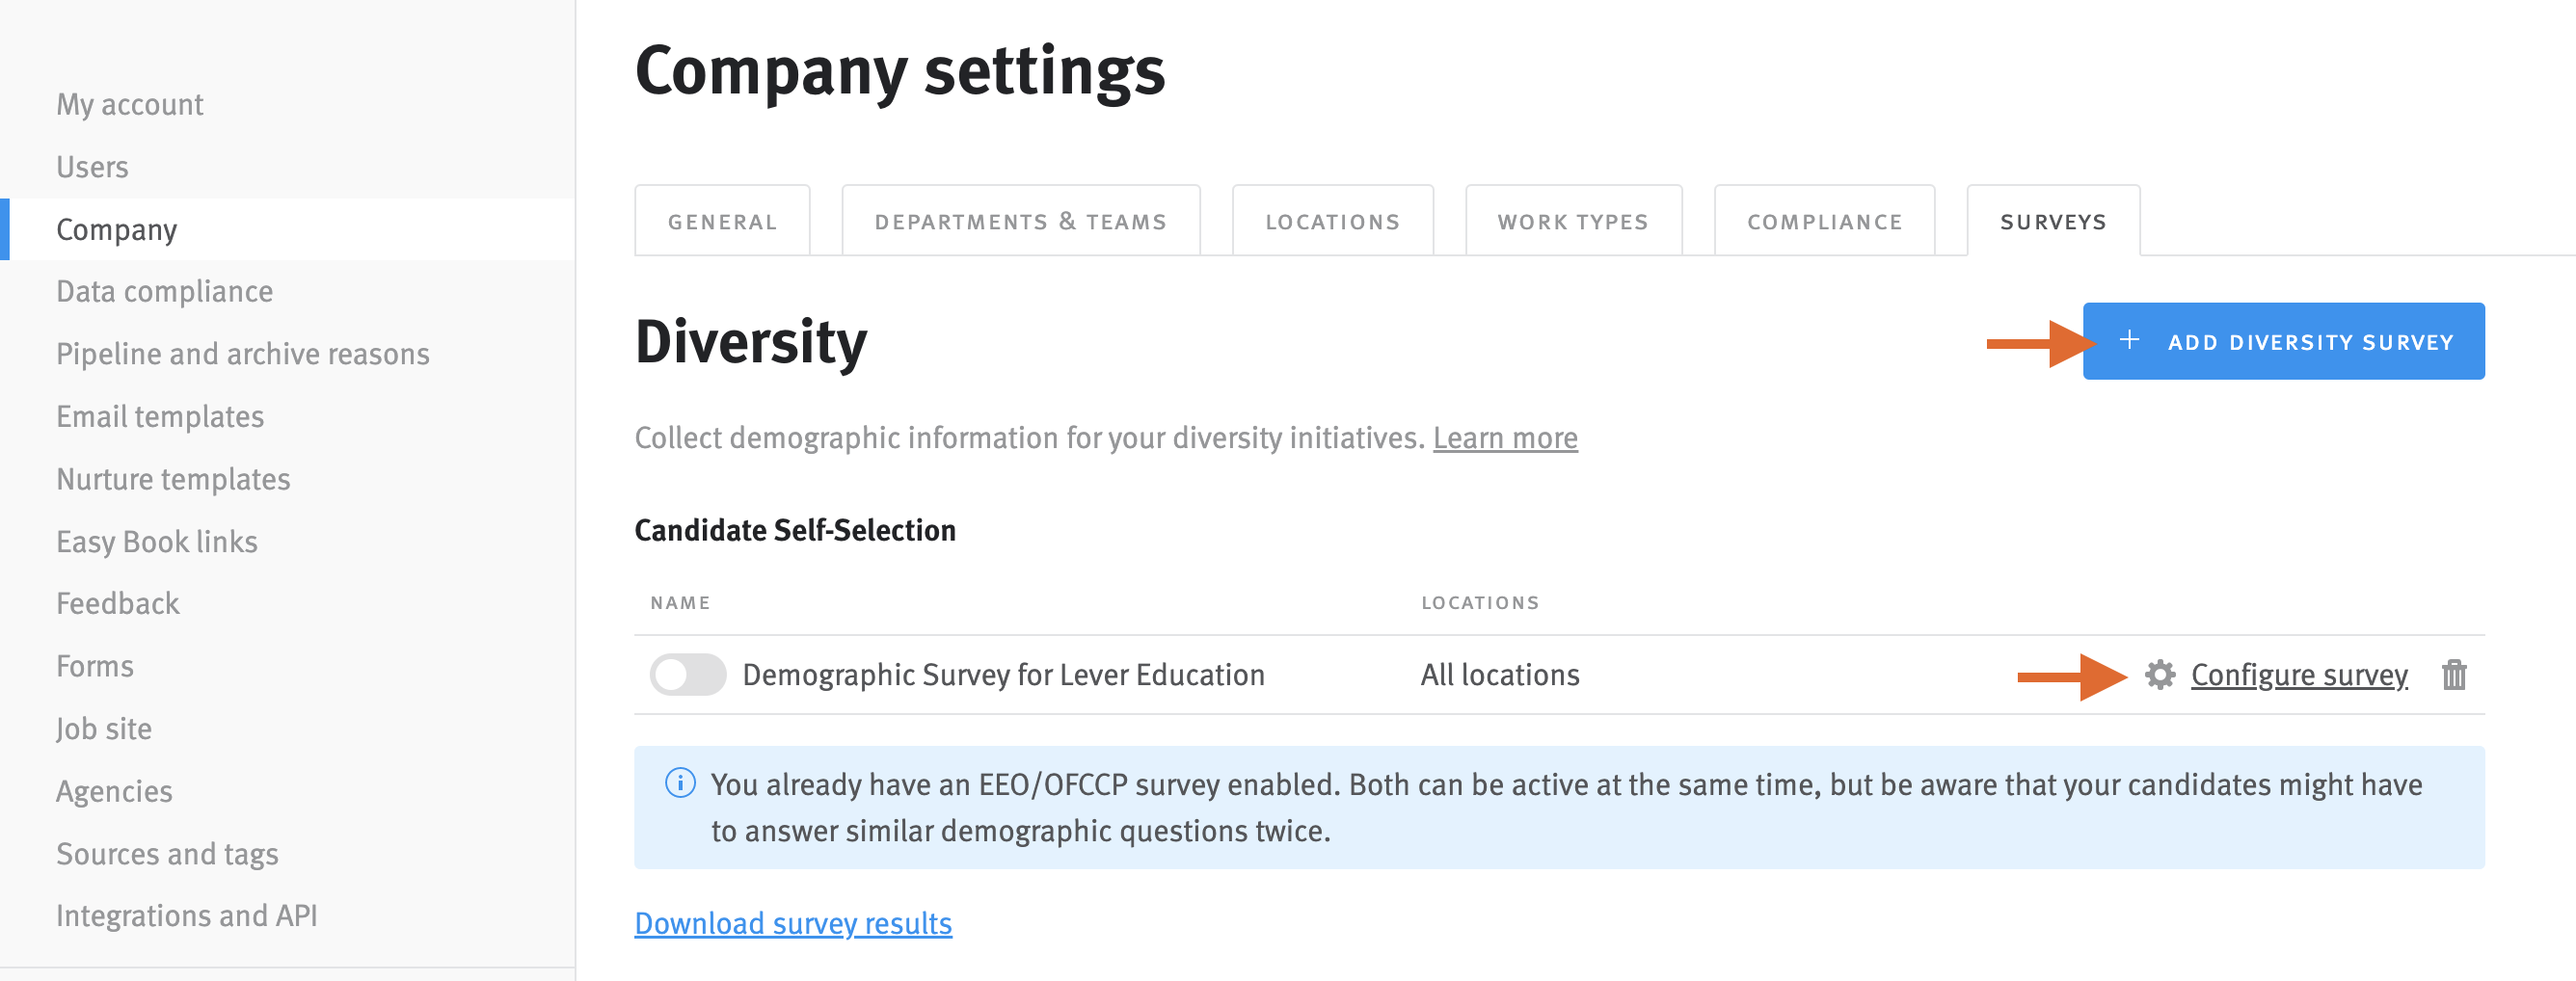 Survey configuration page in Company settings